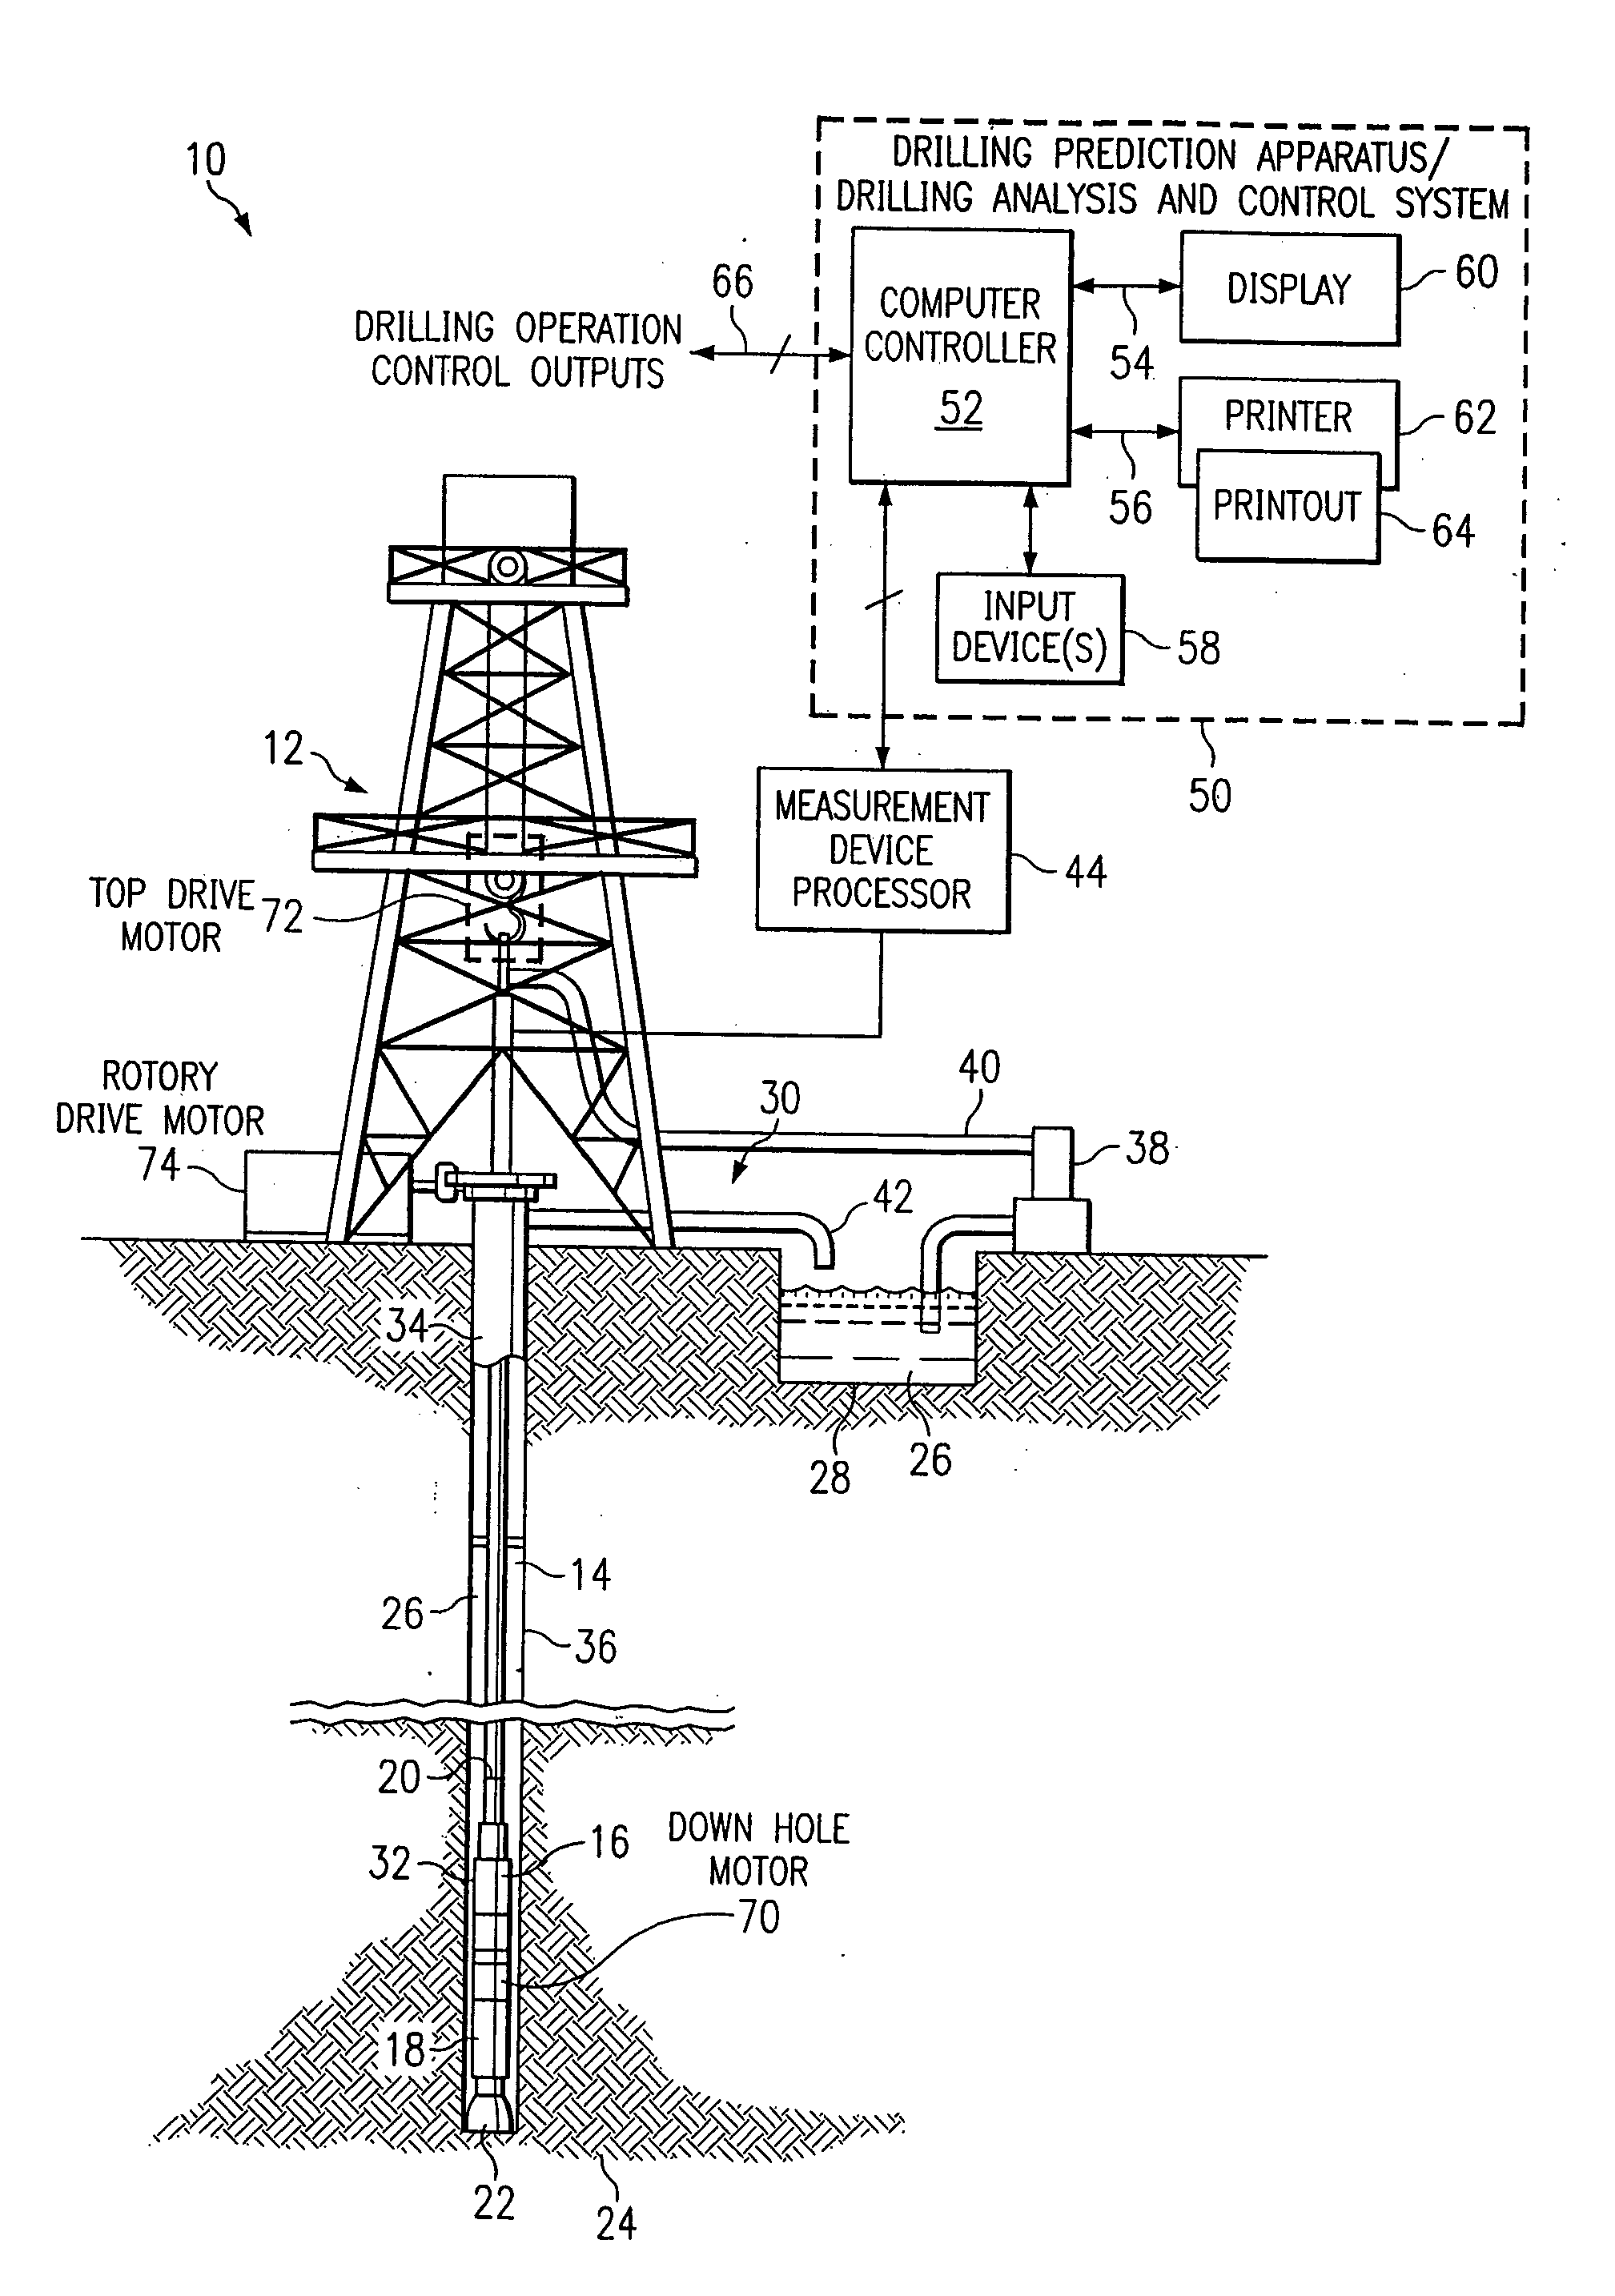 Method and system for predicting performance of a drilling system for a given formation